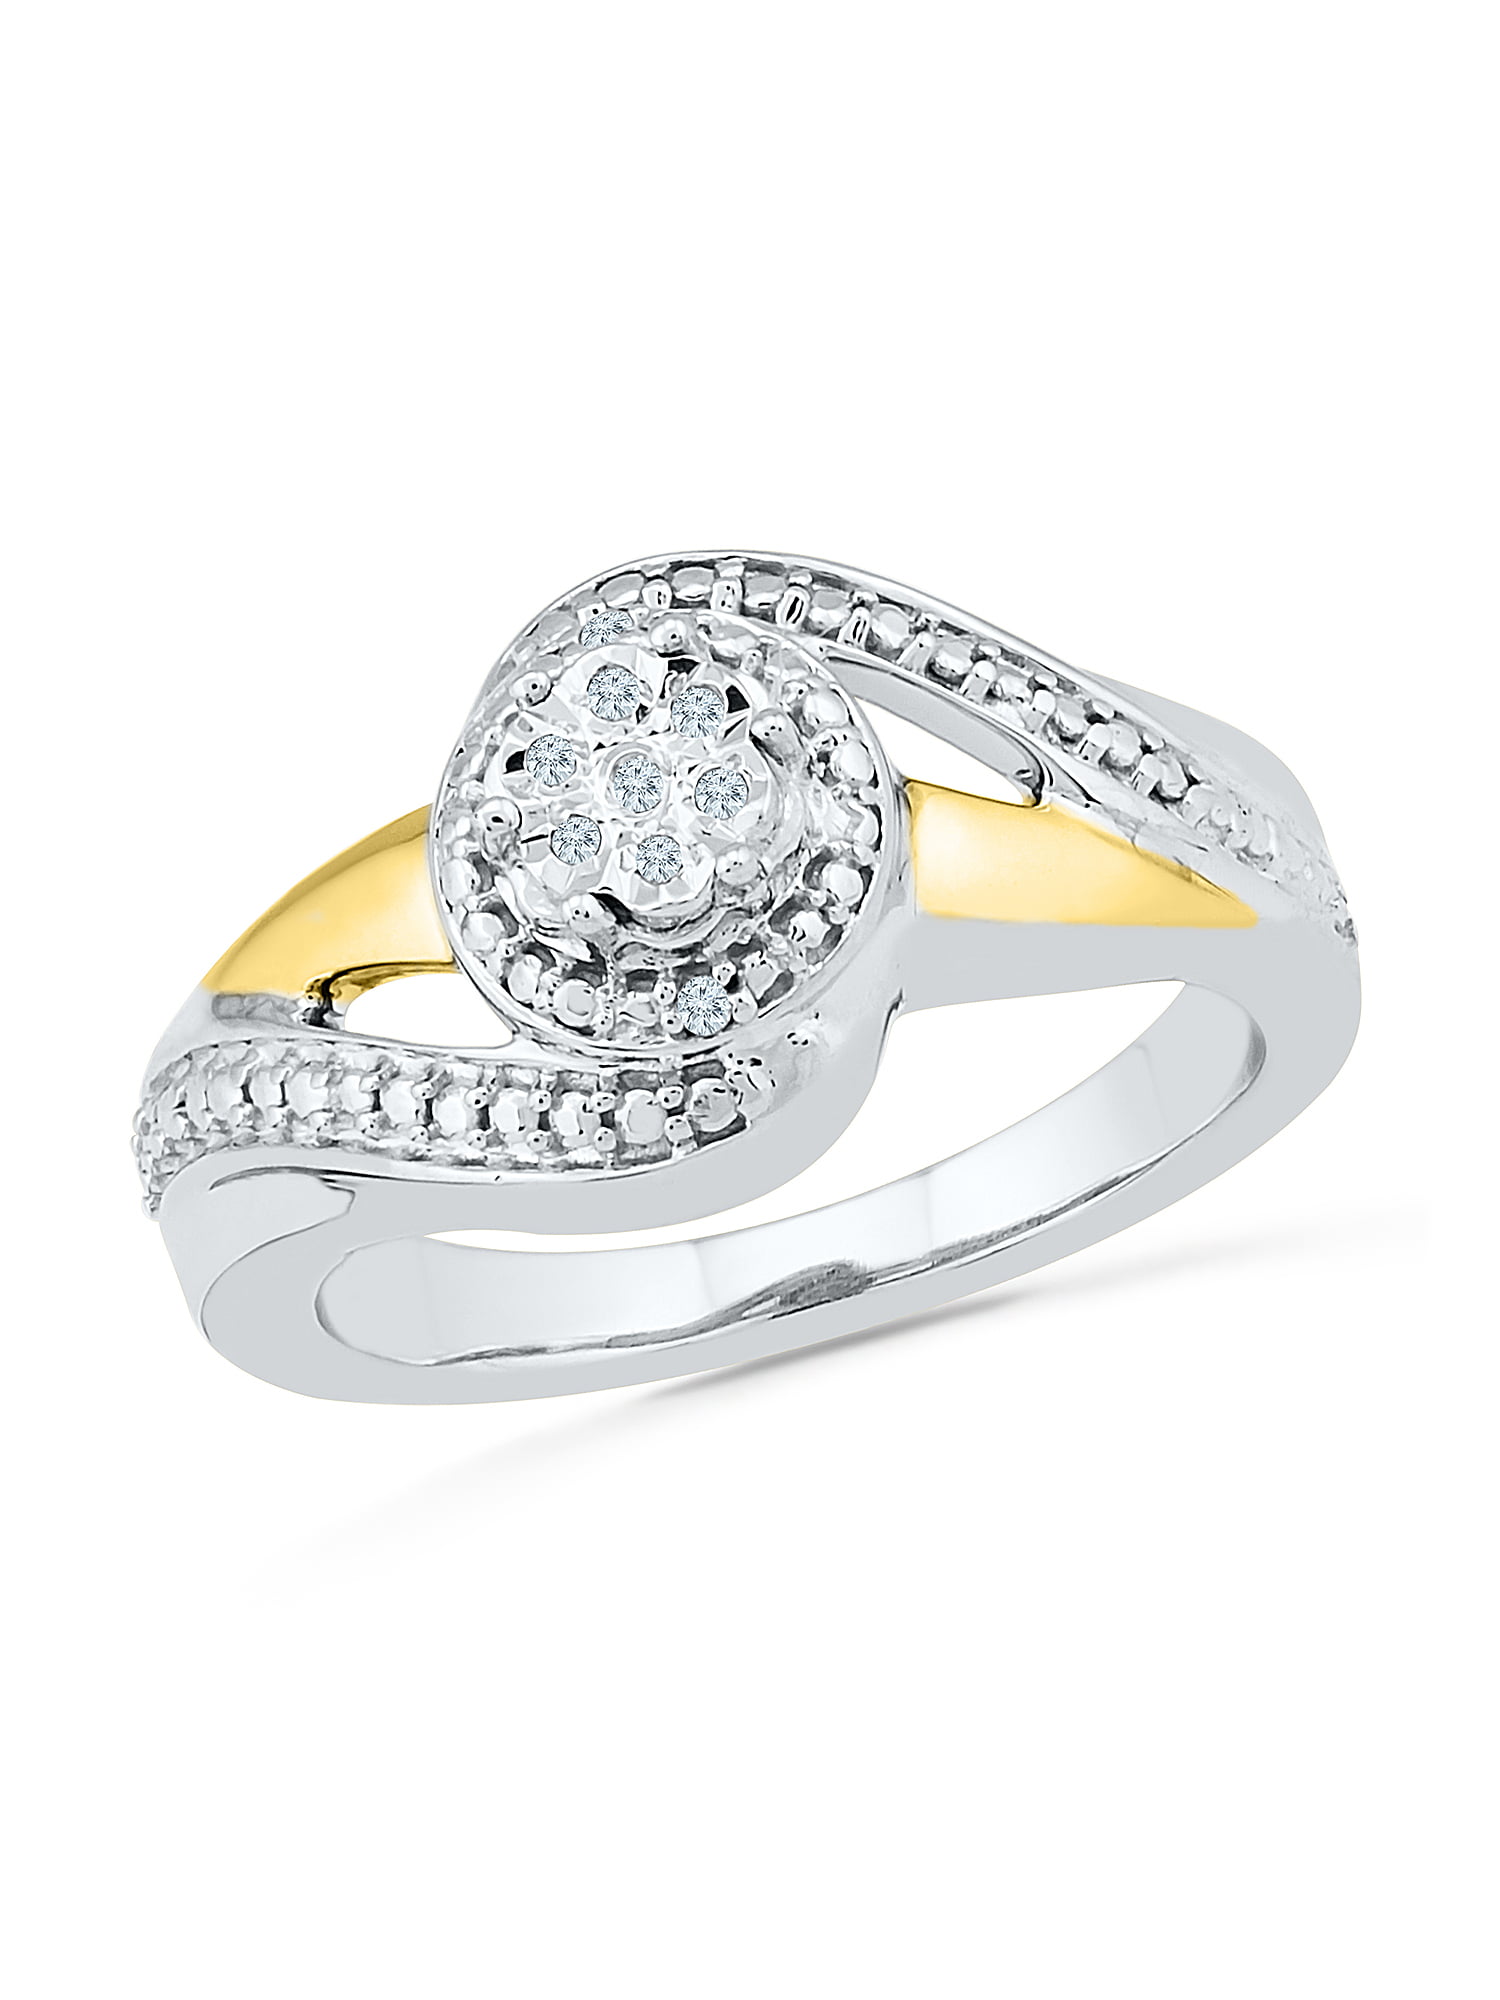 Sterling Silver over 10K Yellow Gold Round White Diamond Fashion Ring (0.03  CTTW)